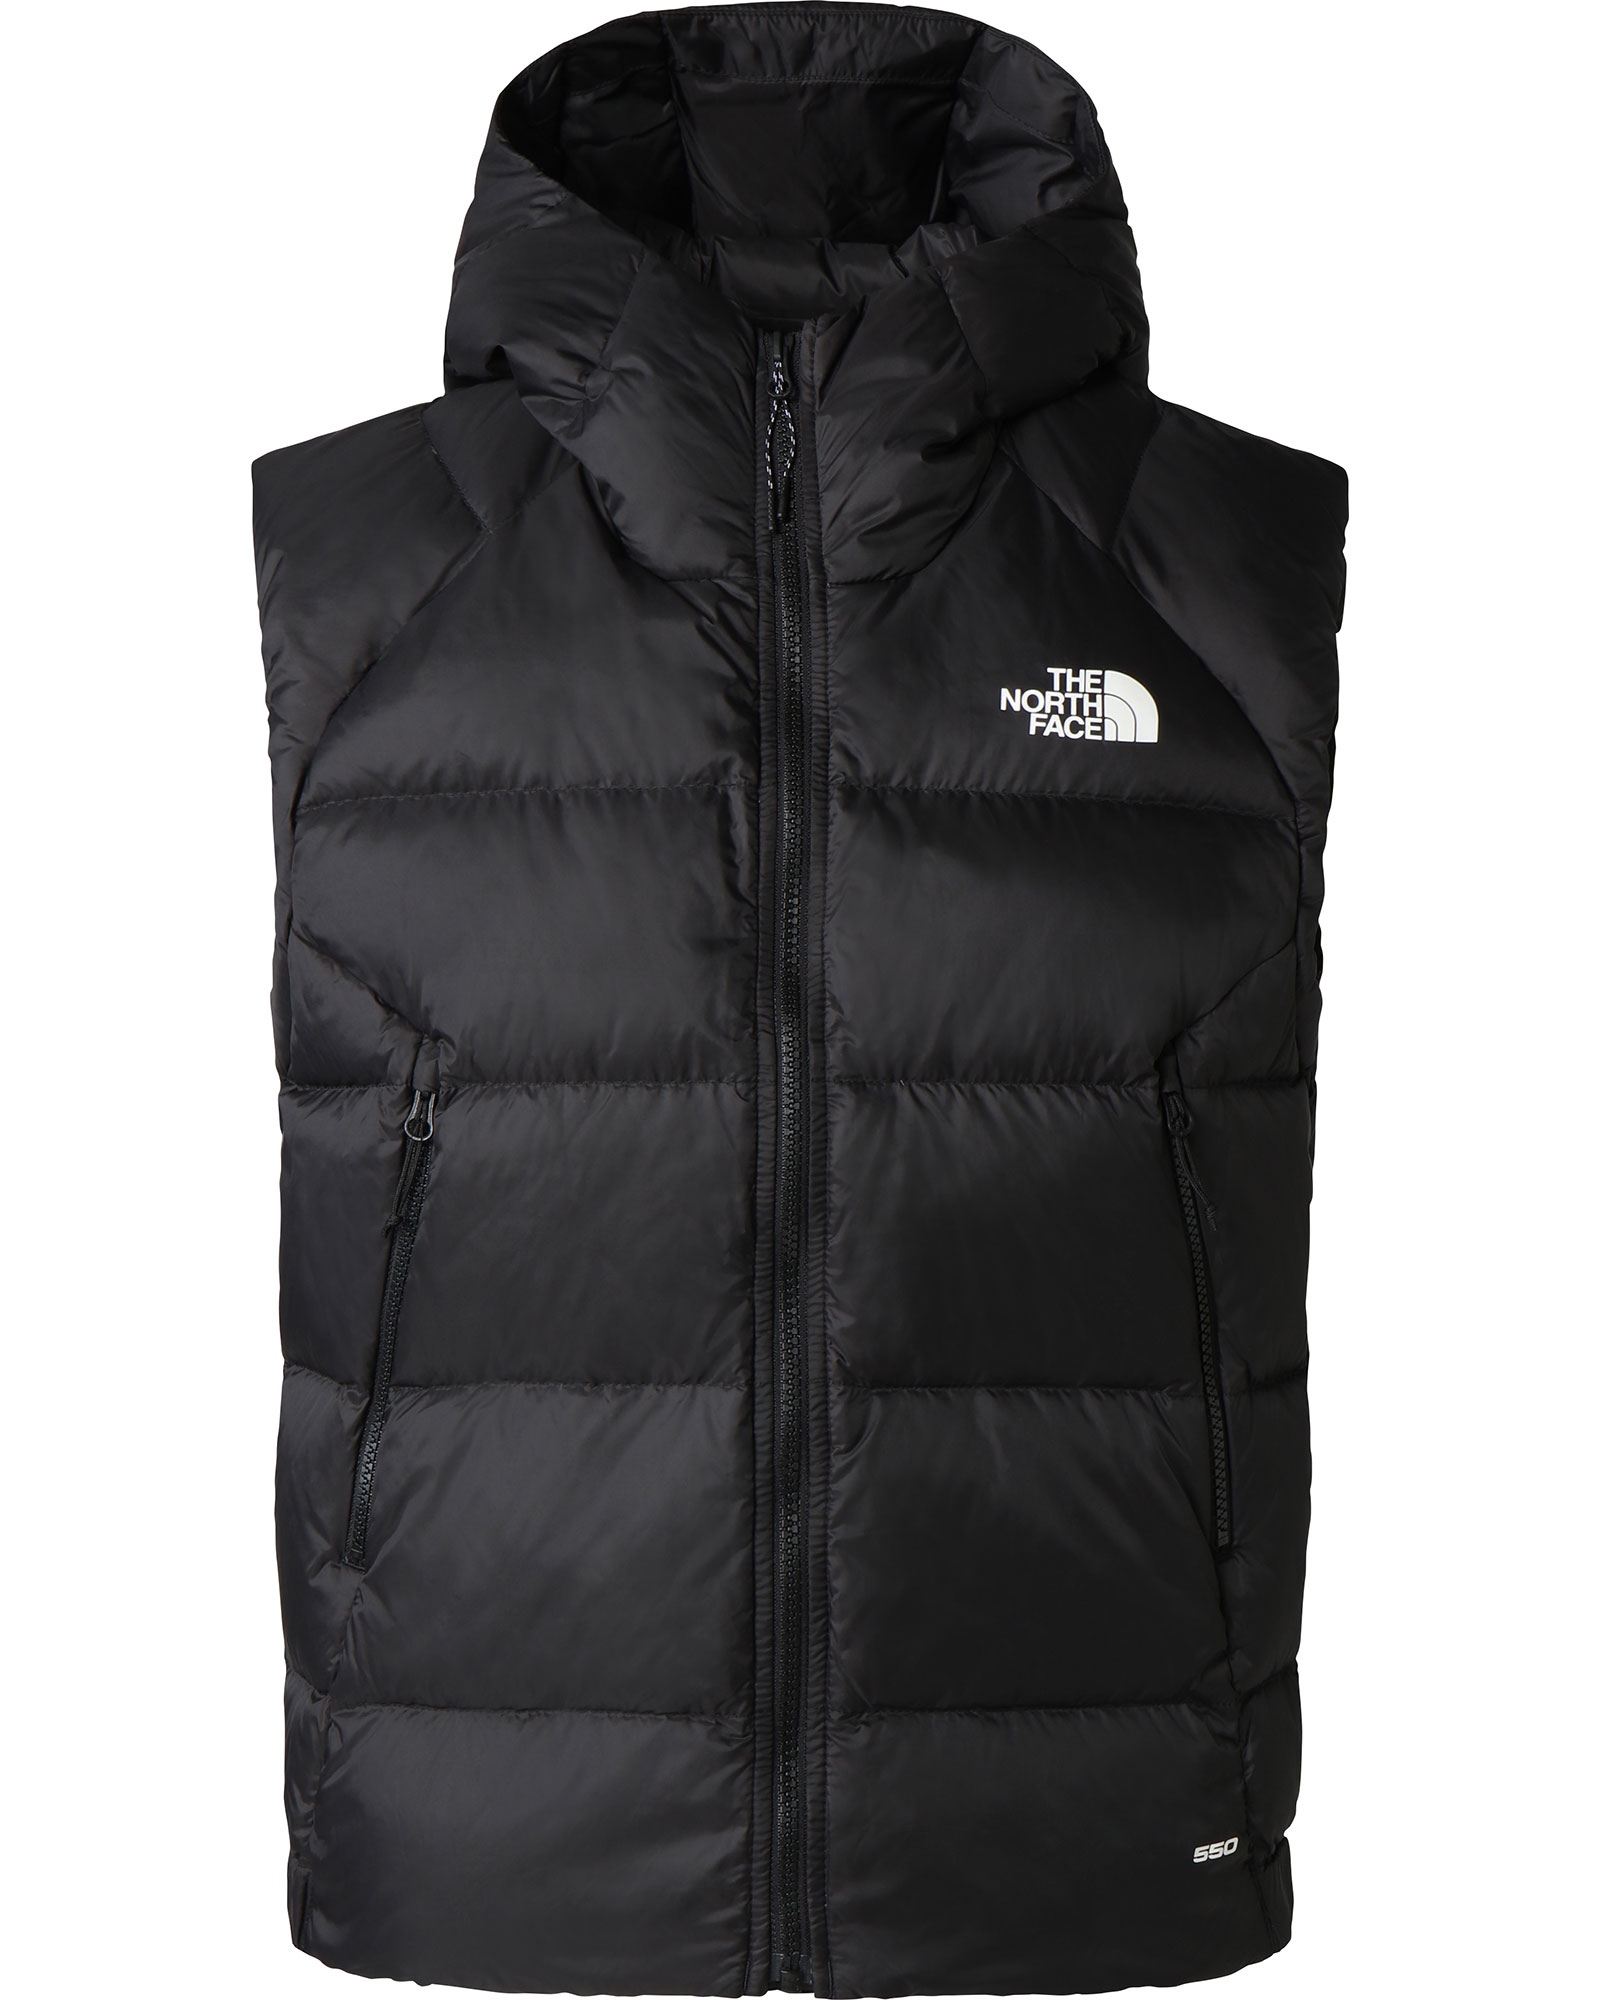 The North Face Women's Hyalite Vest